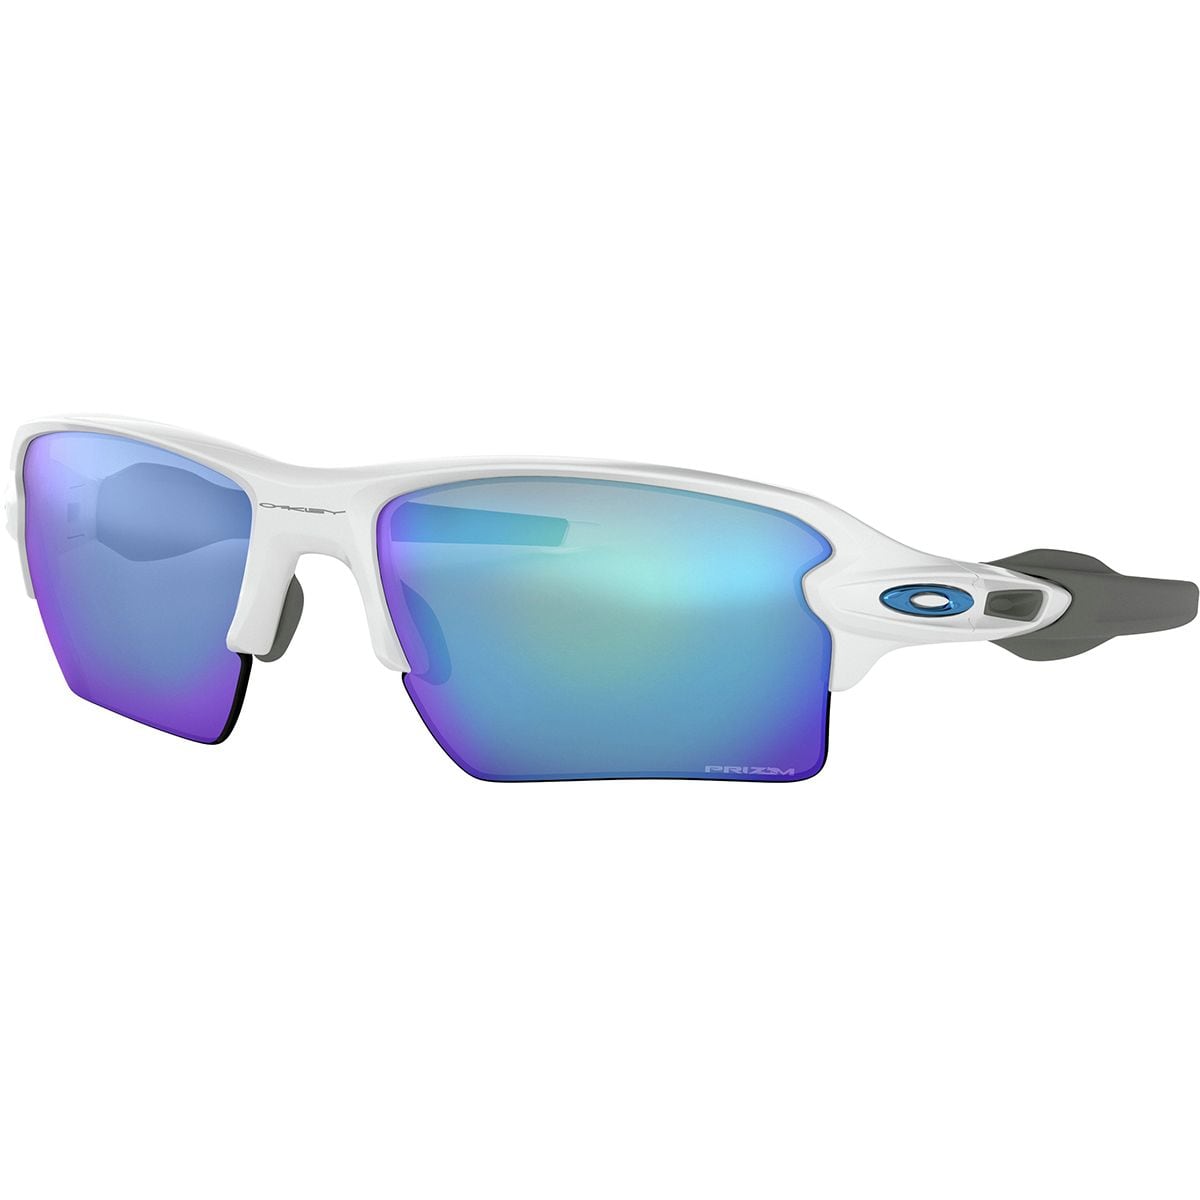 Oakley Flak Jacket 2.0 XL Sunglasses with Grey Smoke Frame and Prizm Road  Lens